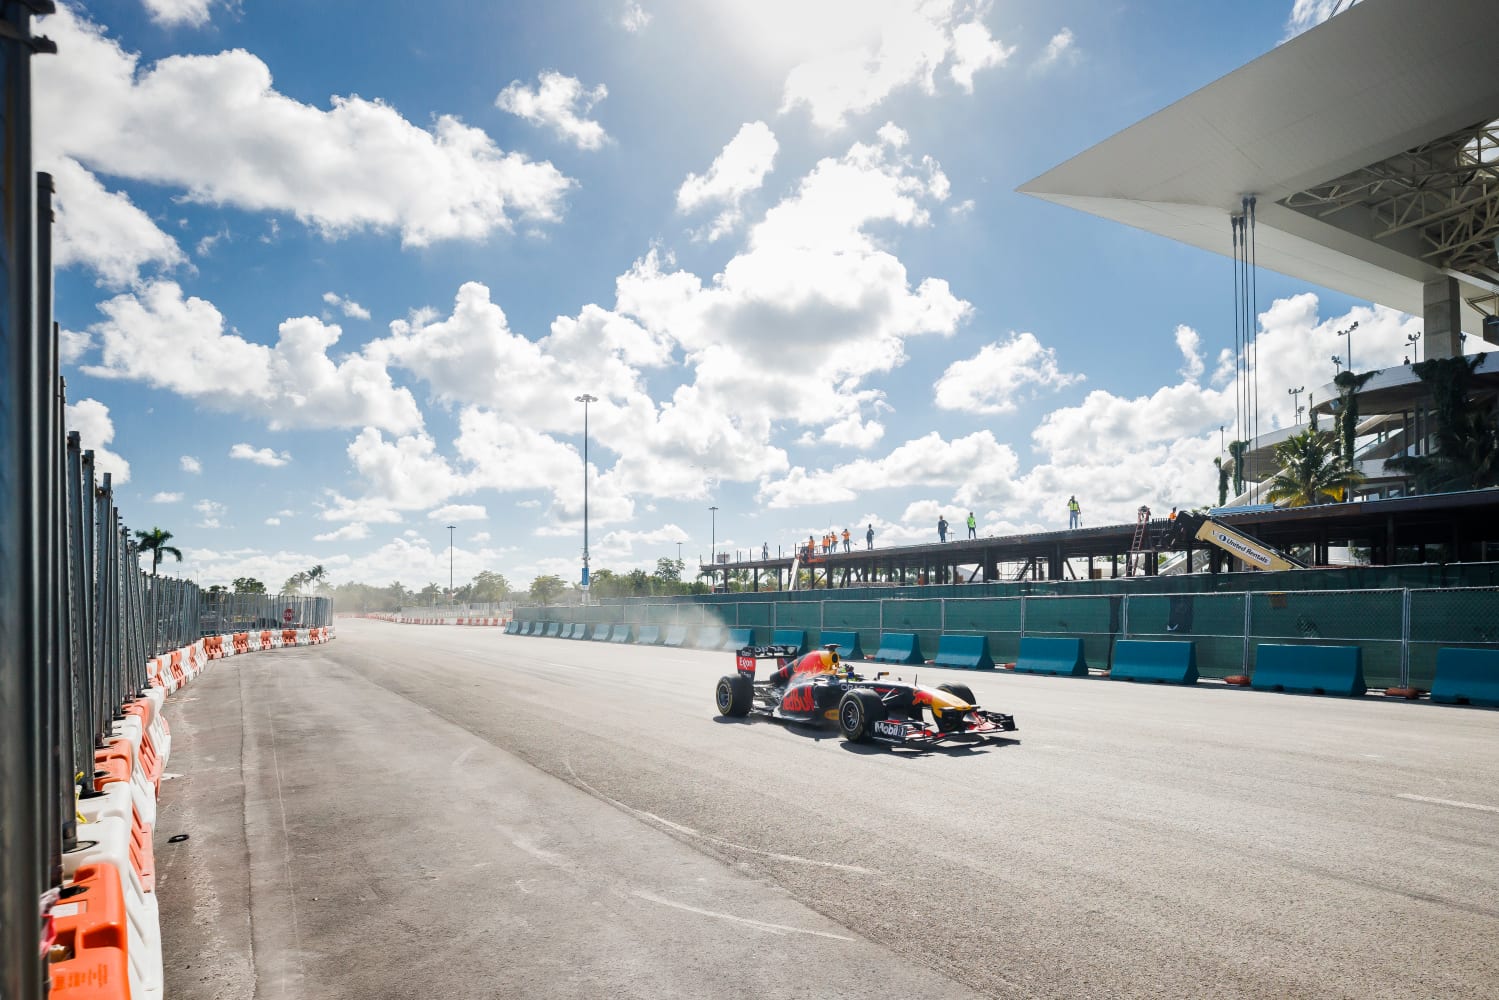 Miami F1 Circuit Guide: All about the youngest F1 track